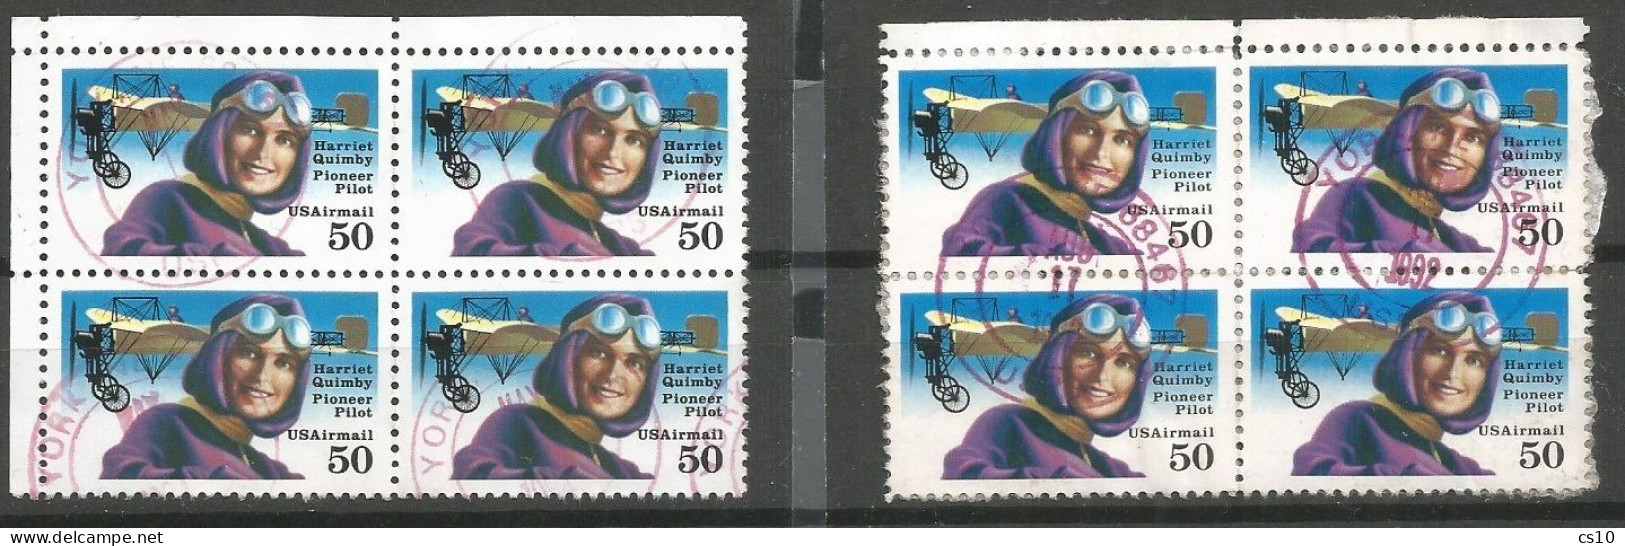 USA 1991 Aviation Pioneers C.50 Harriet Quimby Airmail SC.# C128 In #2 Used Blocks4 Perforation Line + Comb !!! - Verzamelingen